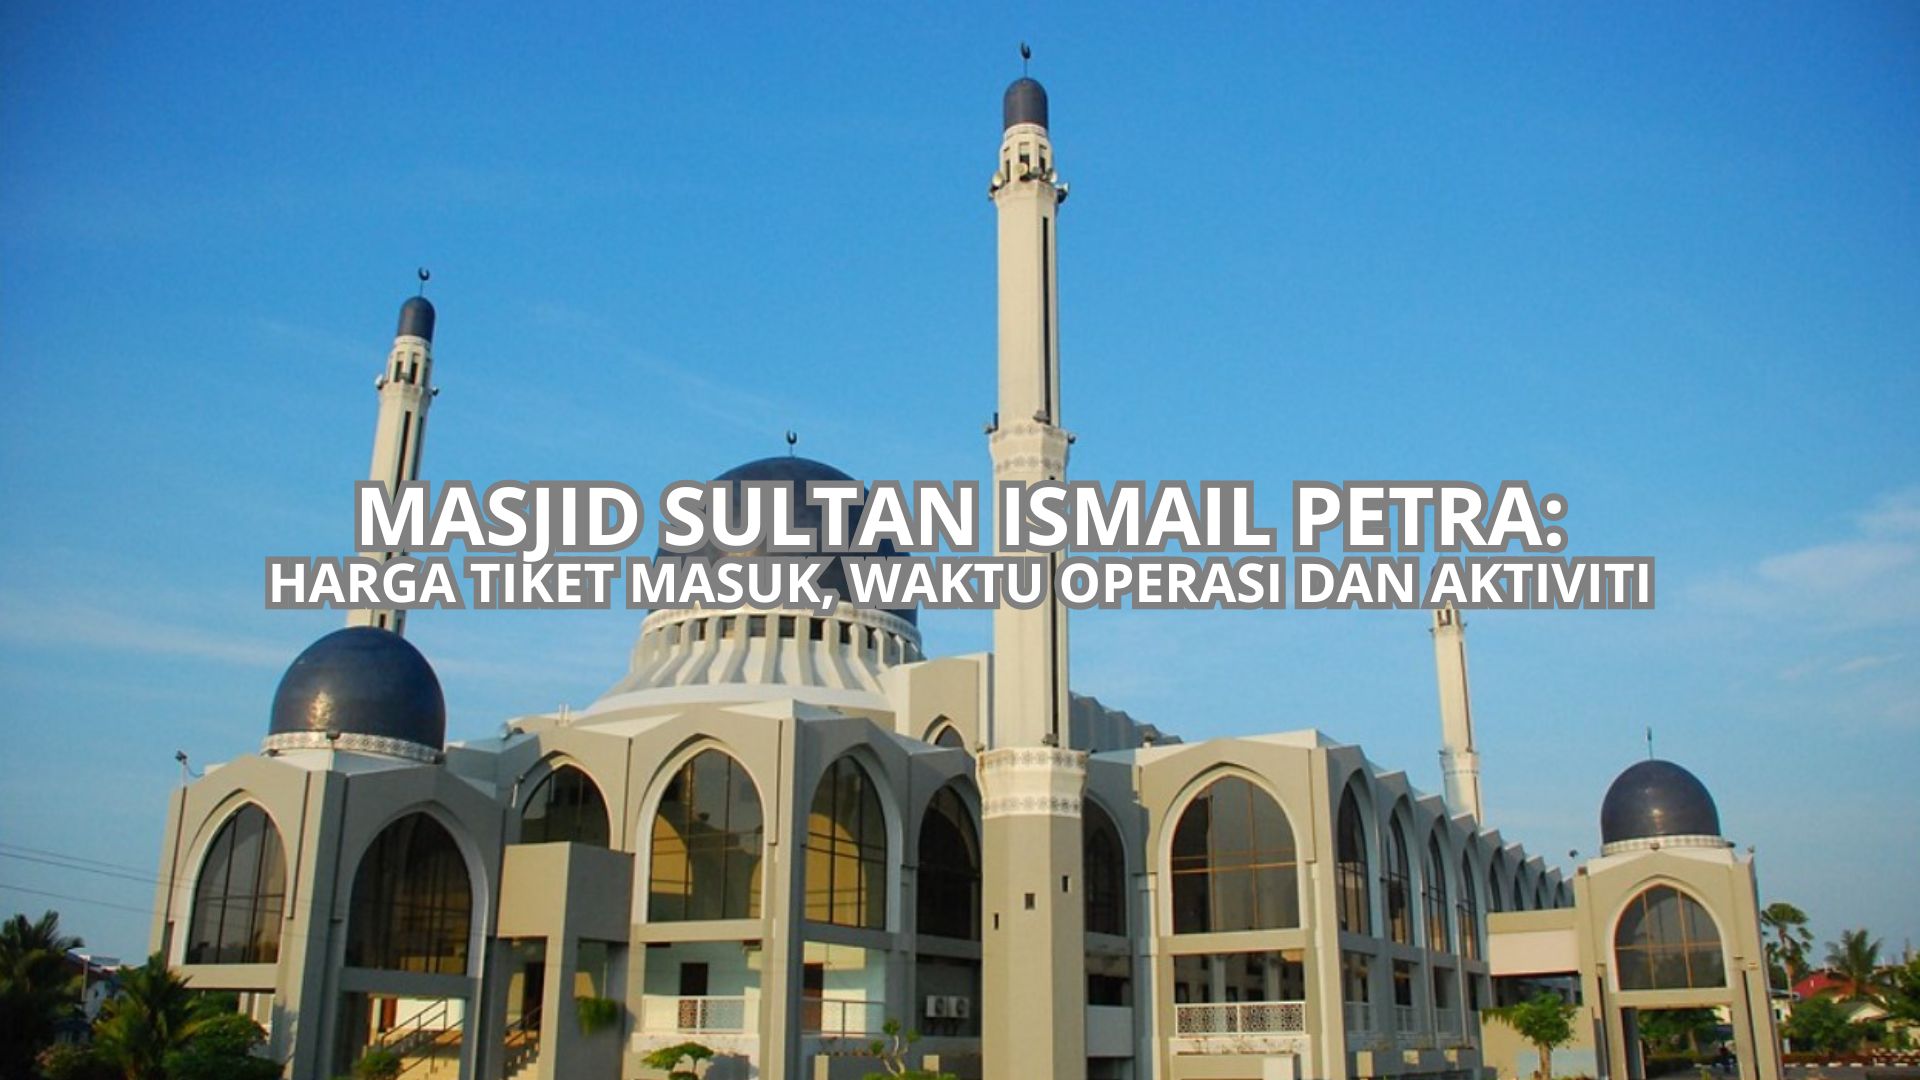 Masjid Sultan Ismail Petra Cover